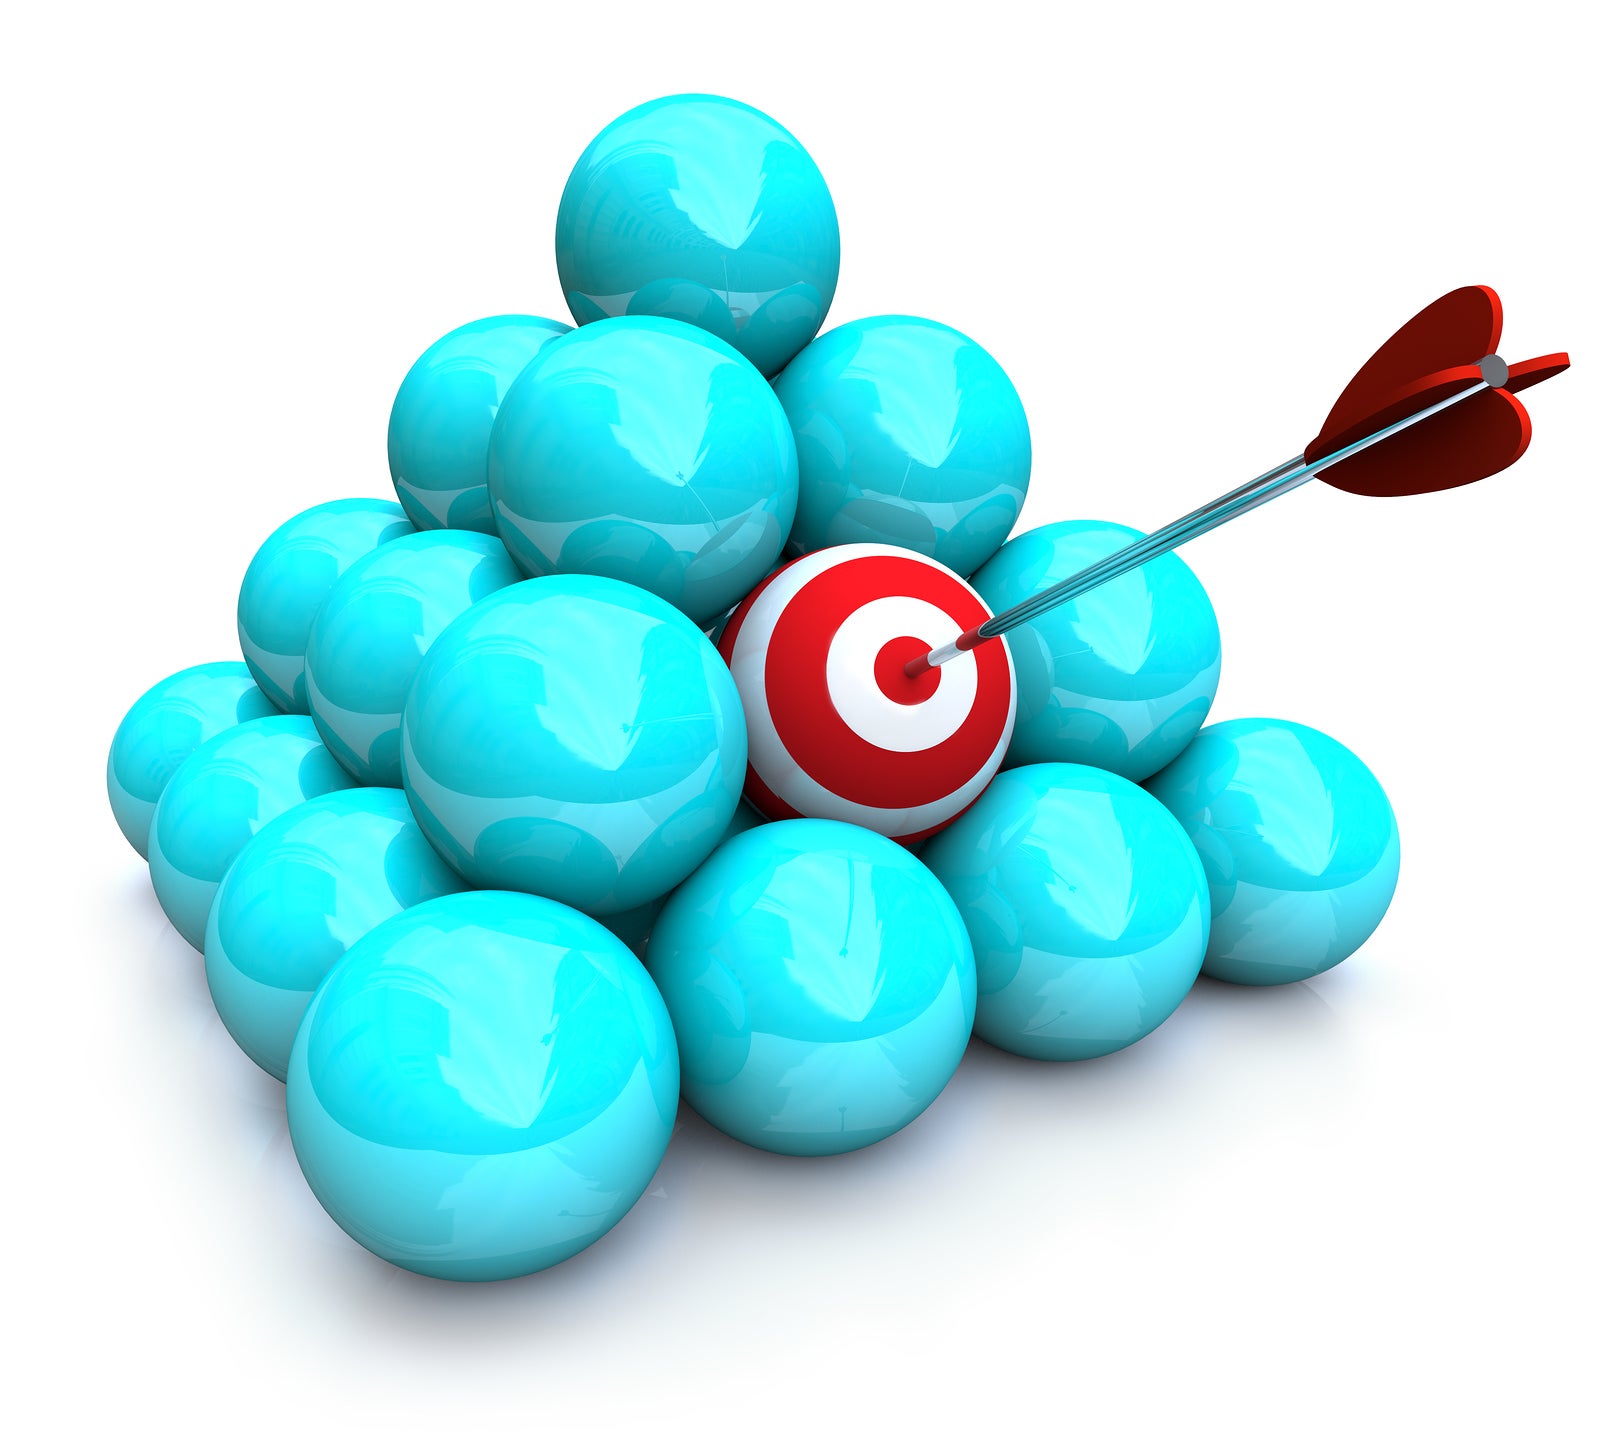 An arrow hits the target in a pyramid of balls - symolizing targeted marketing